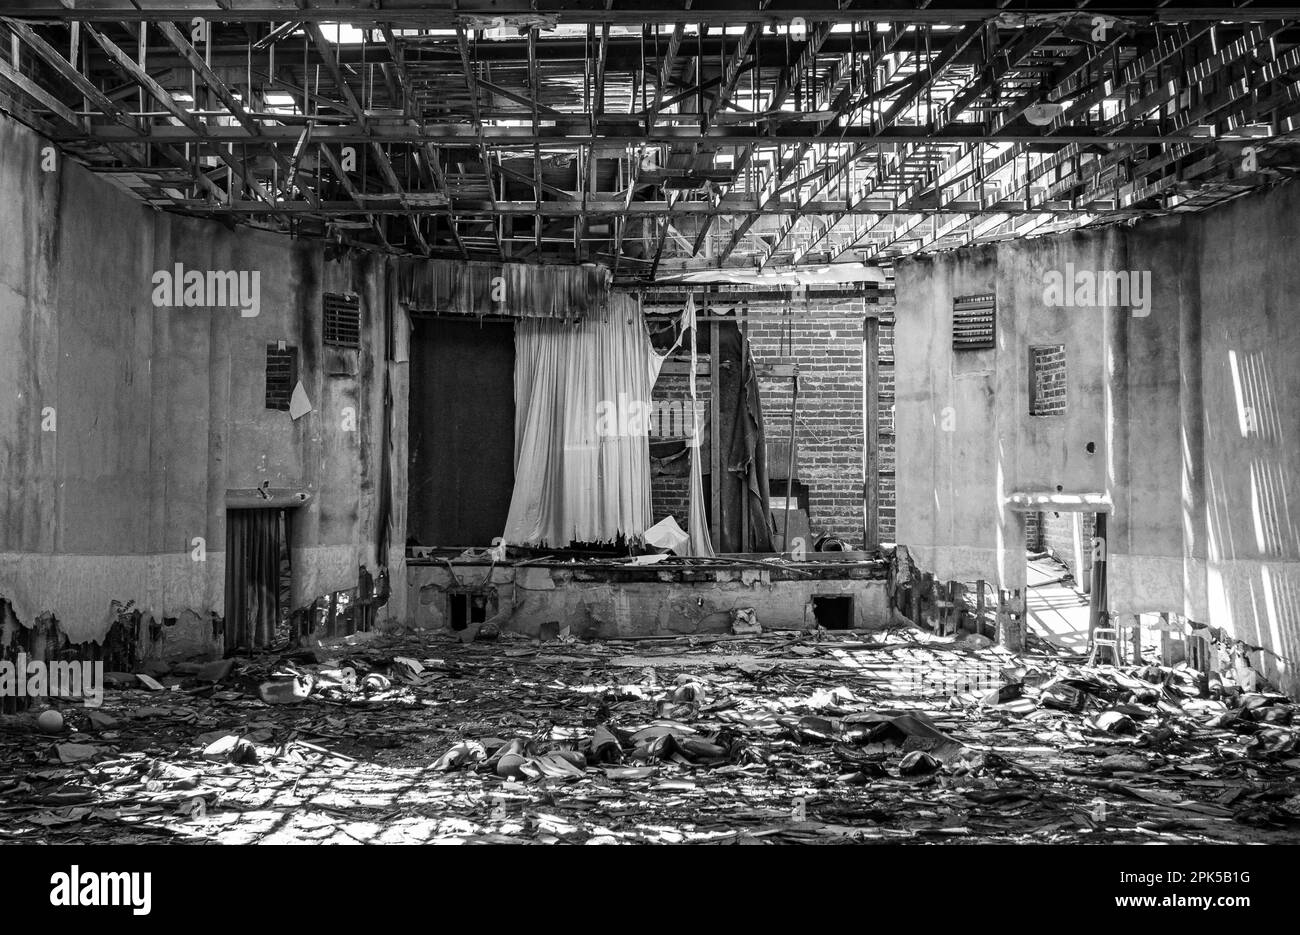 Black and White Monochrome Abandoned and Decaying Building with a Movie Theater Screen with trash on the floor and sunlight beams through exposed sky Stock Photo